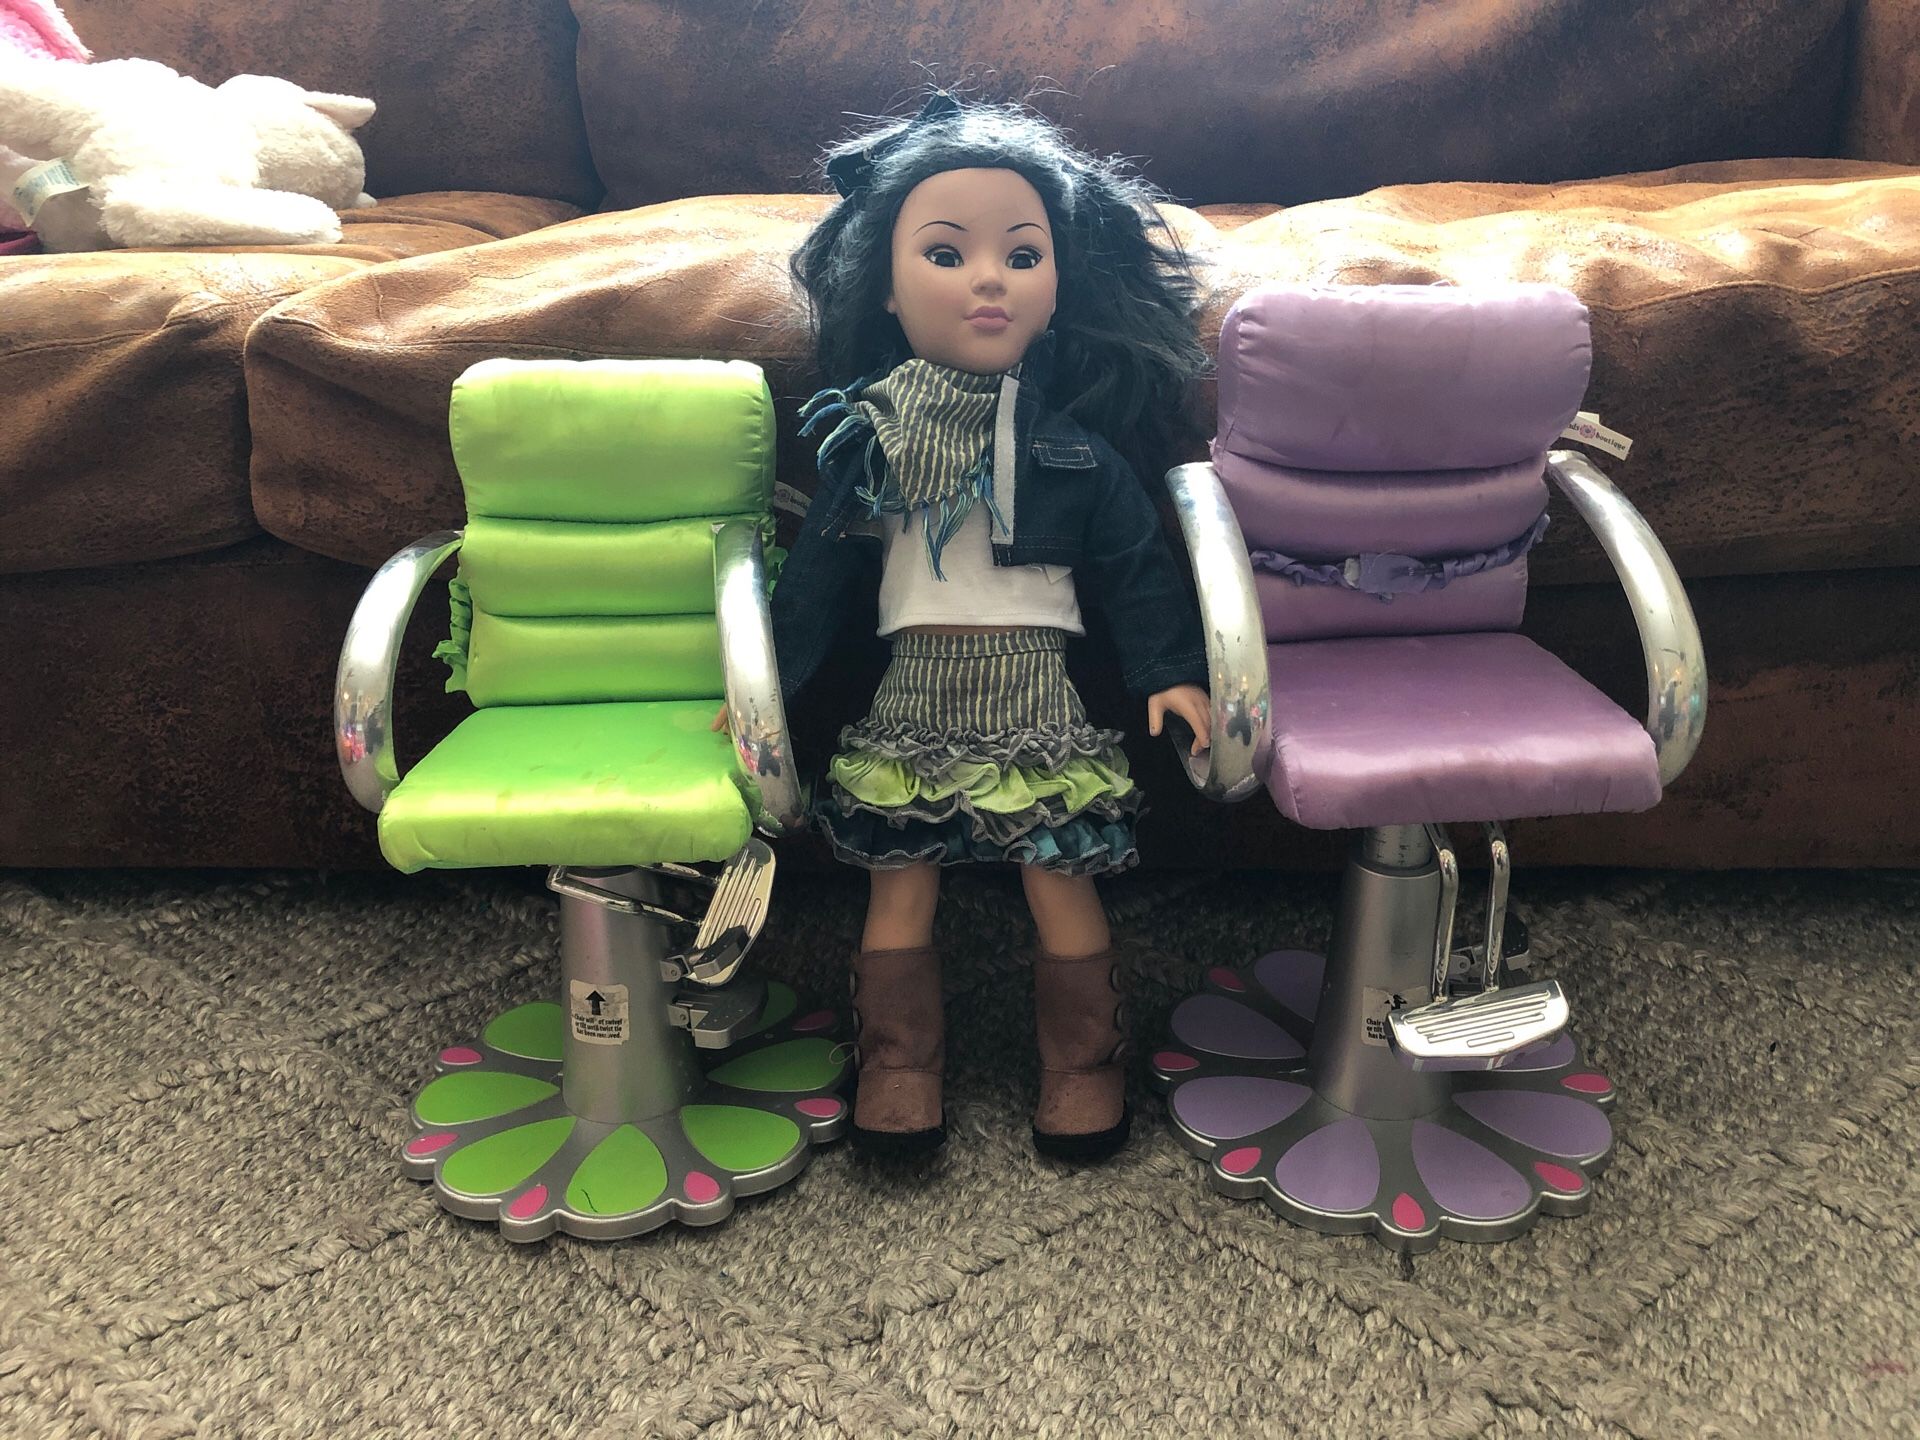 Beauty Salon 💇 High Chairs $5/each for American Girl or for Large Dolls / Staffed toys 🧸